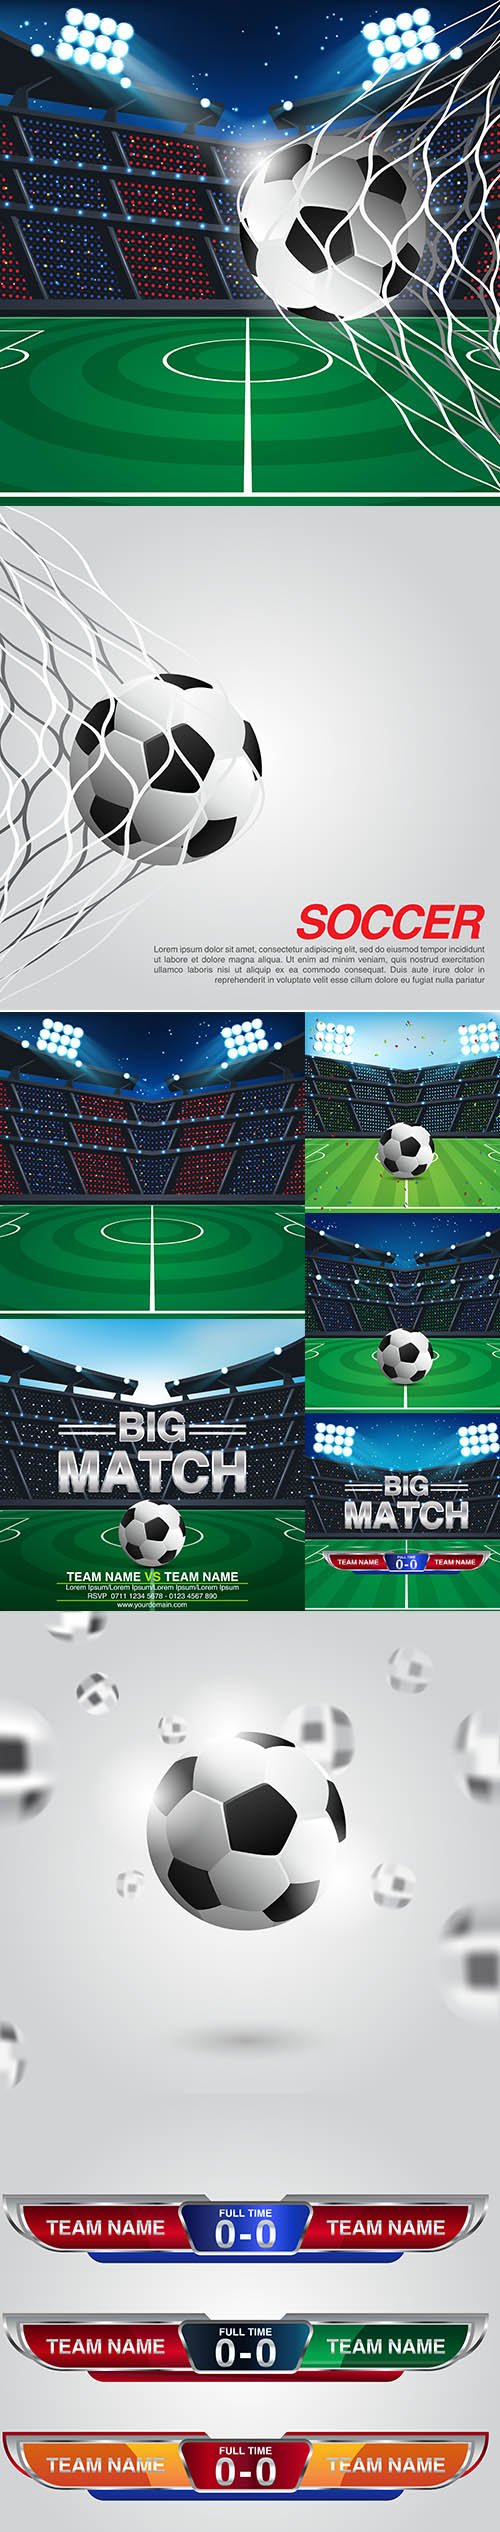 Abstract Sport Soccer Backgrounds Set